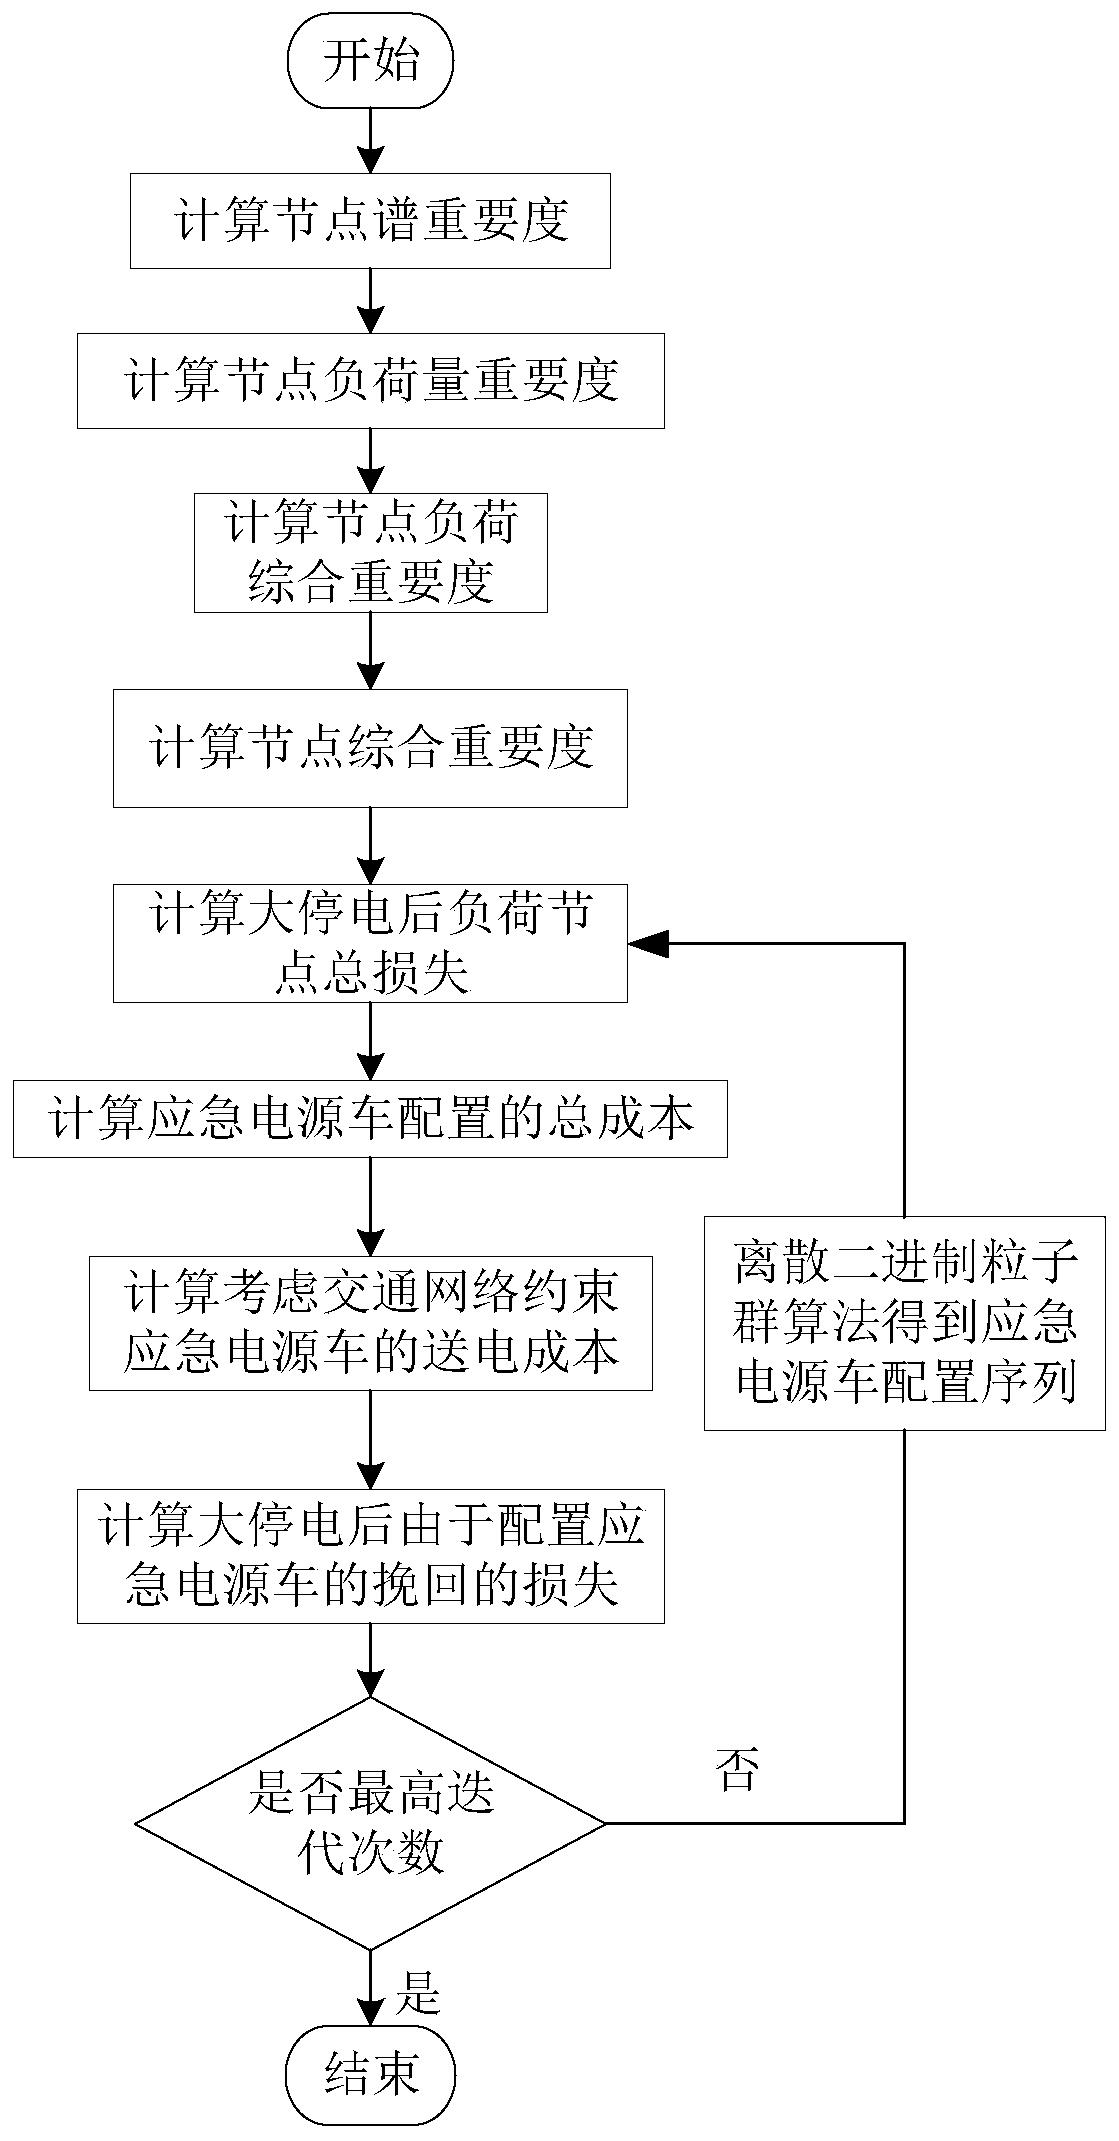 Emergency resource optimal configuration method suitable for power system recovery